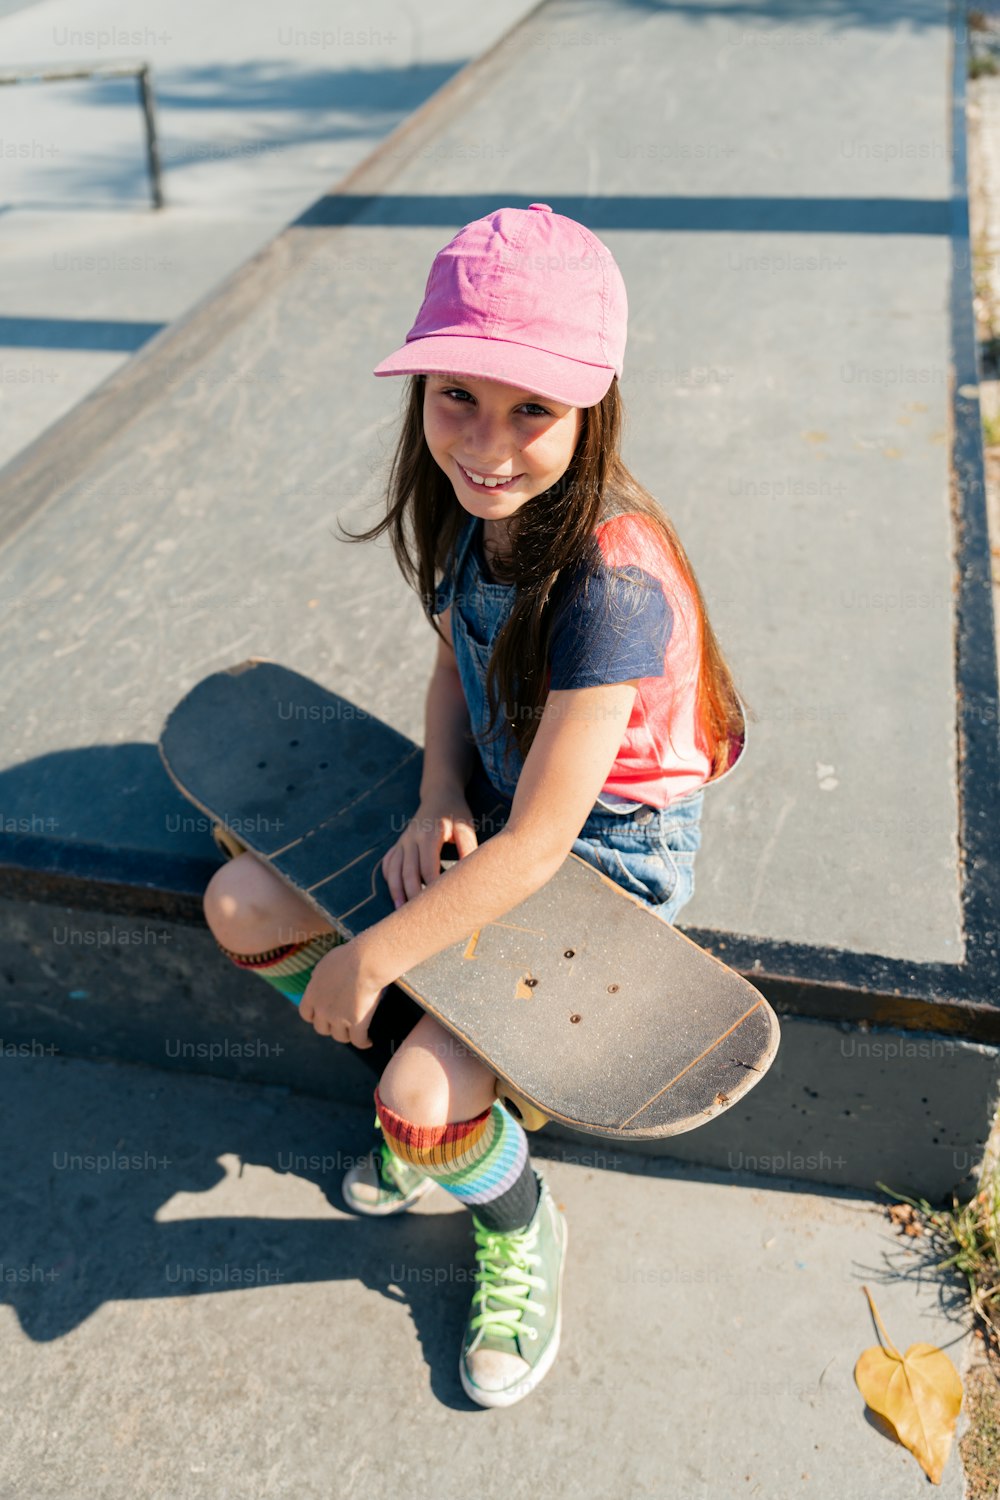 a young girl sitting on the ground with a skateboard